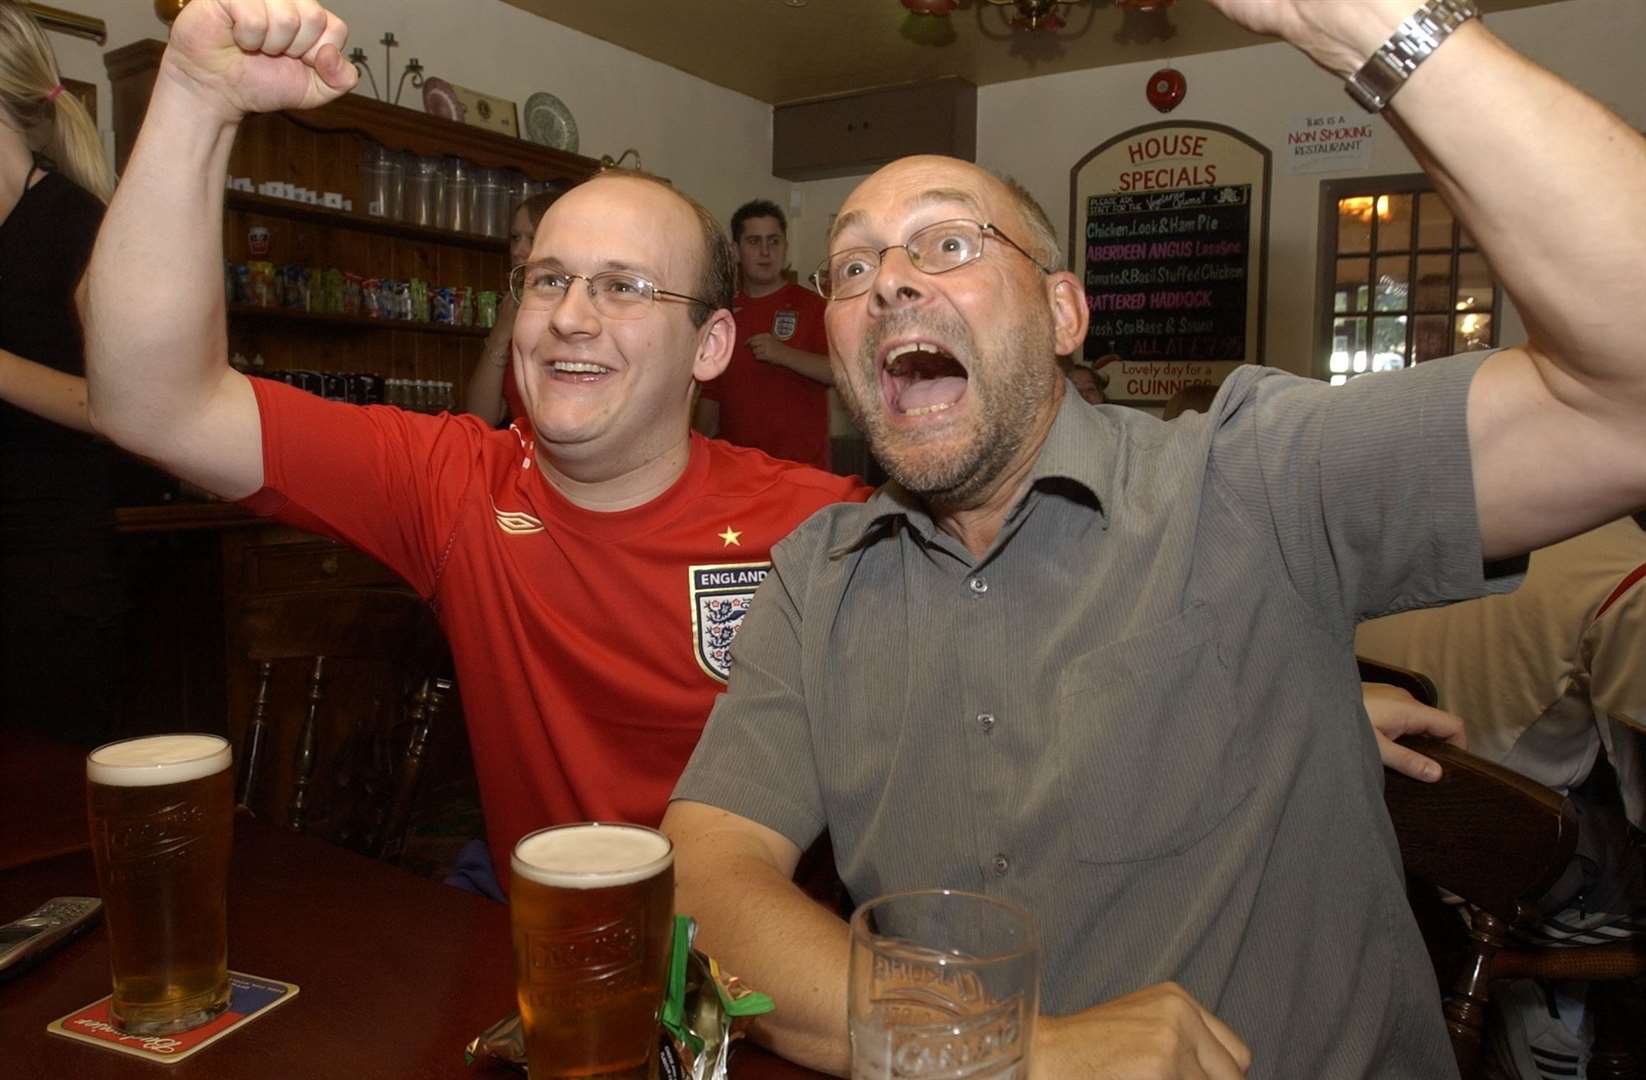 Cheer as Portugal miss one of their penalties and England score...